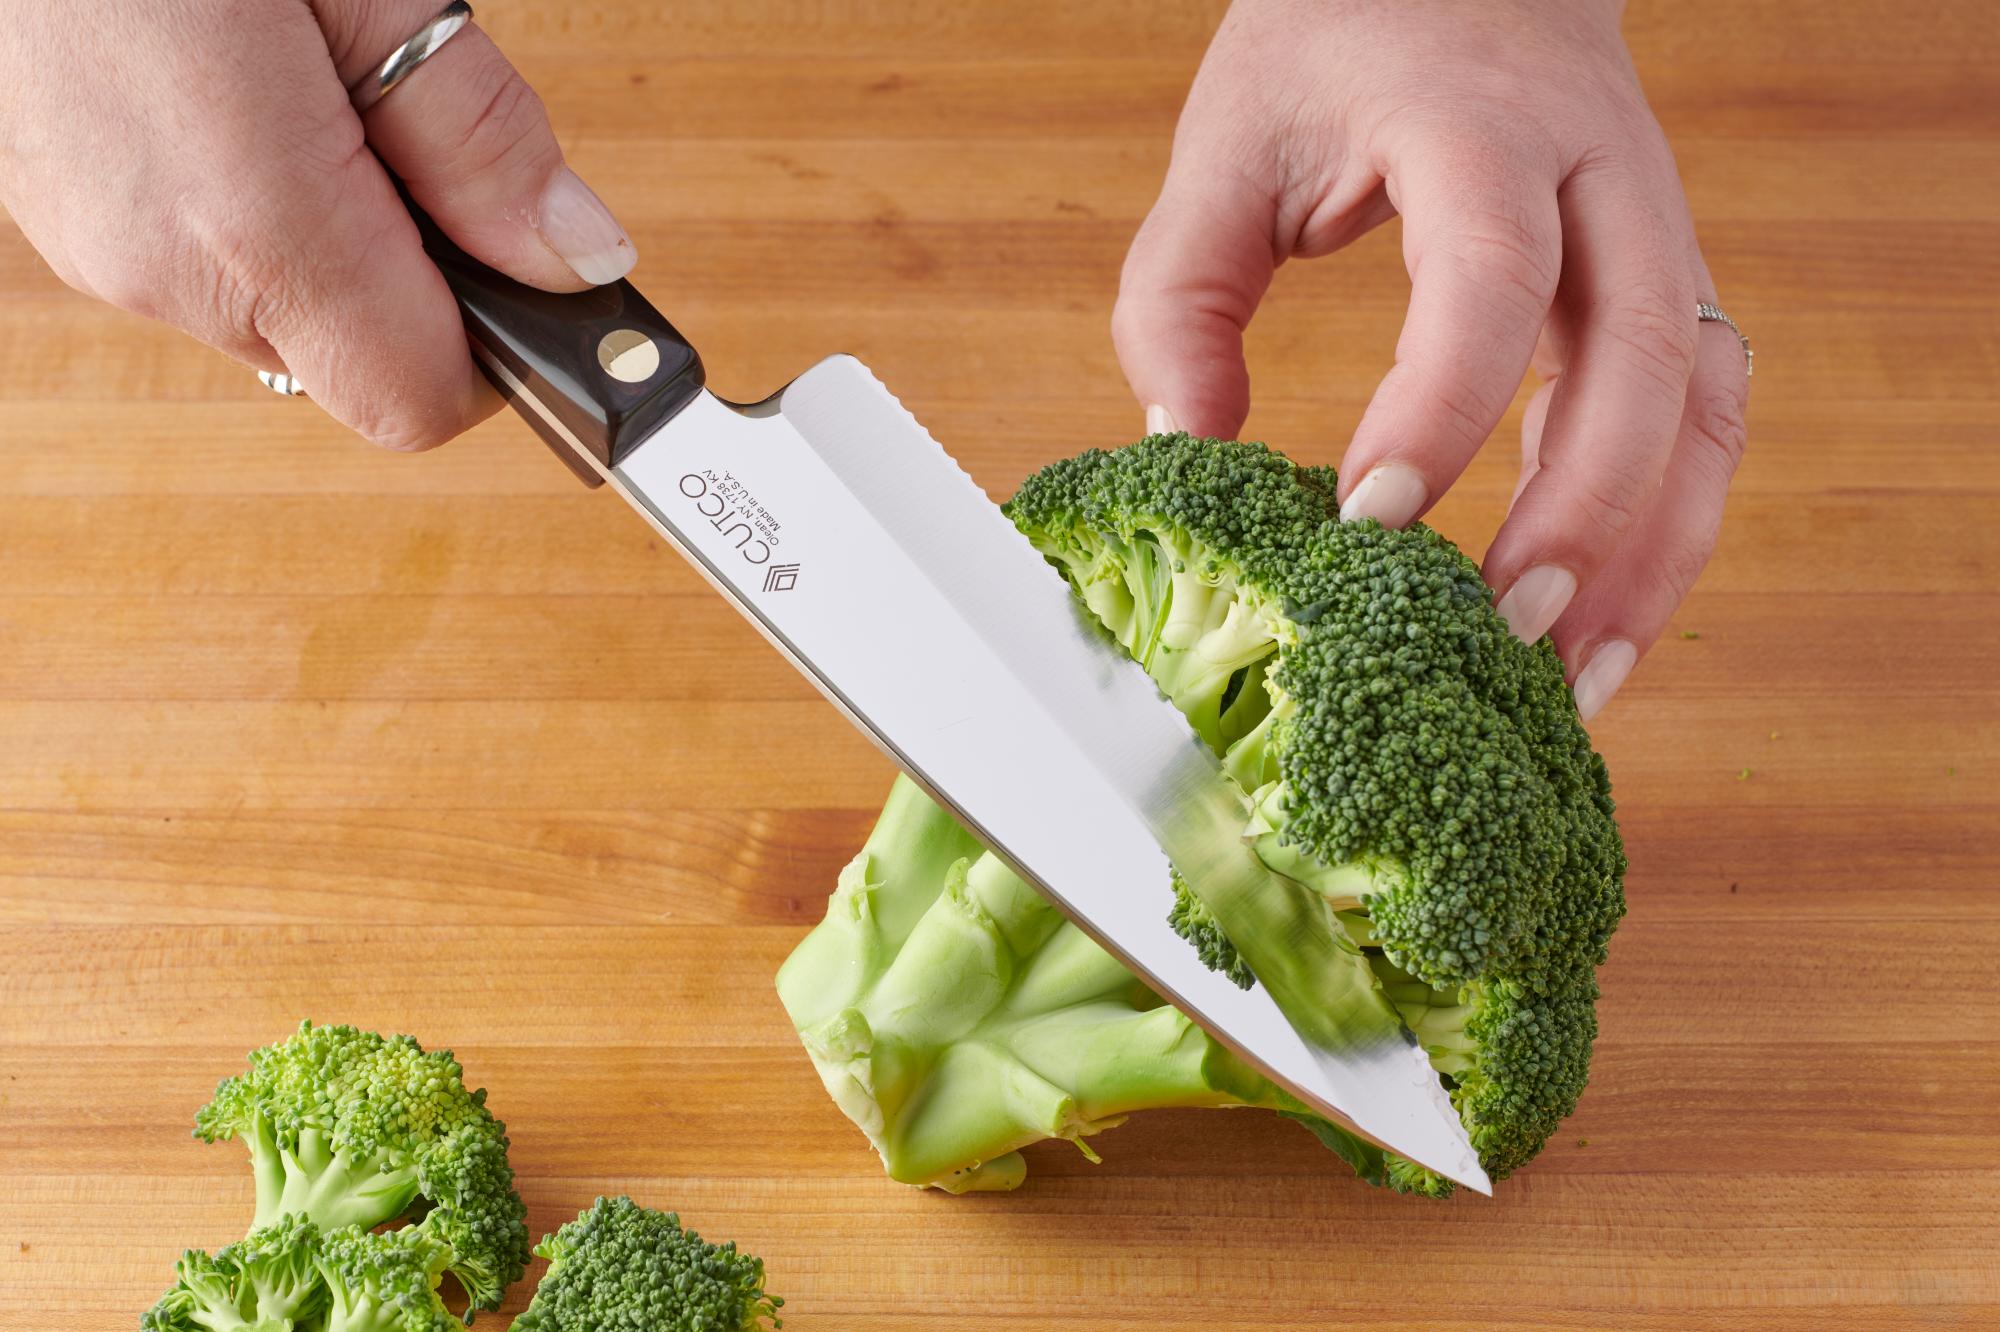 Using a Gourmet Prep knife to cut the broccoli florets.